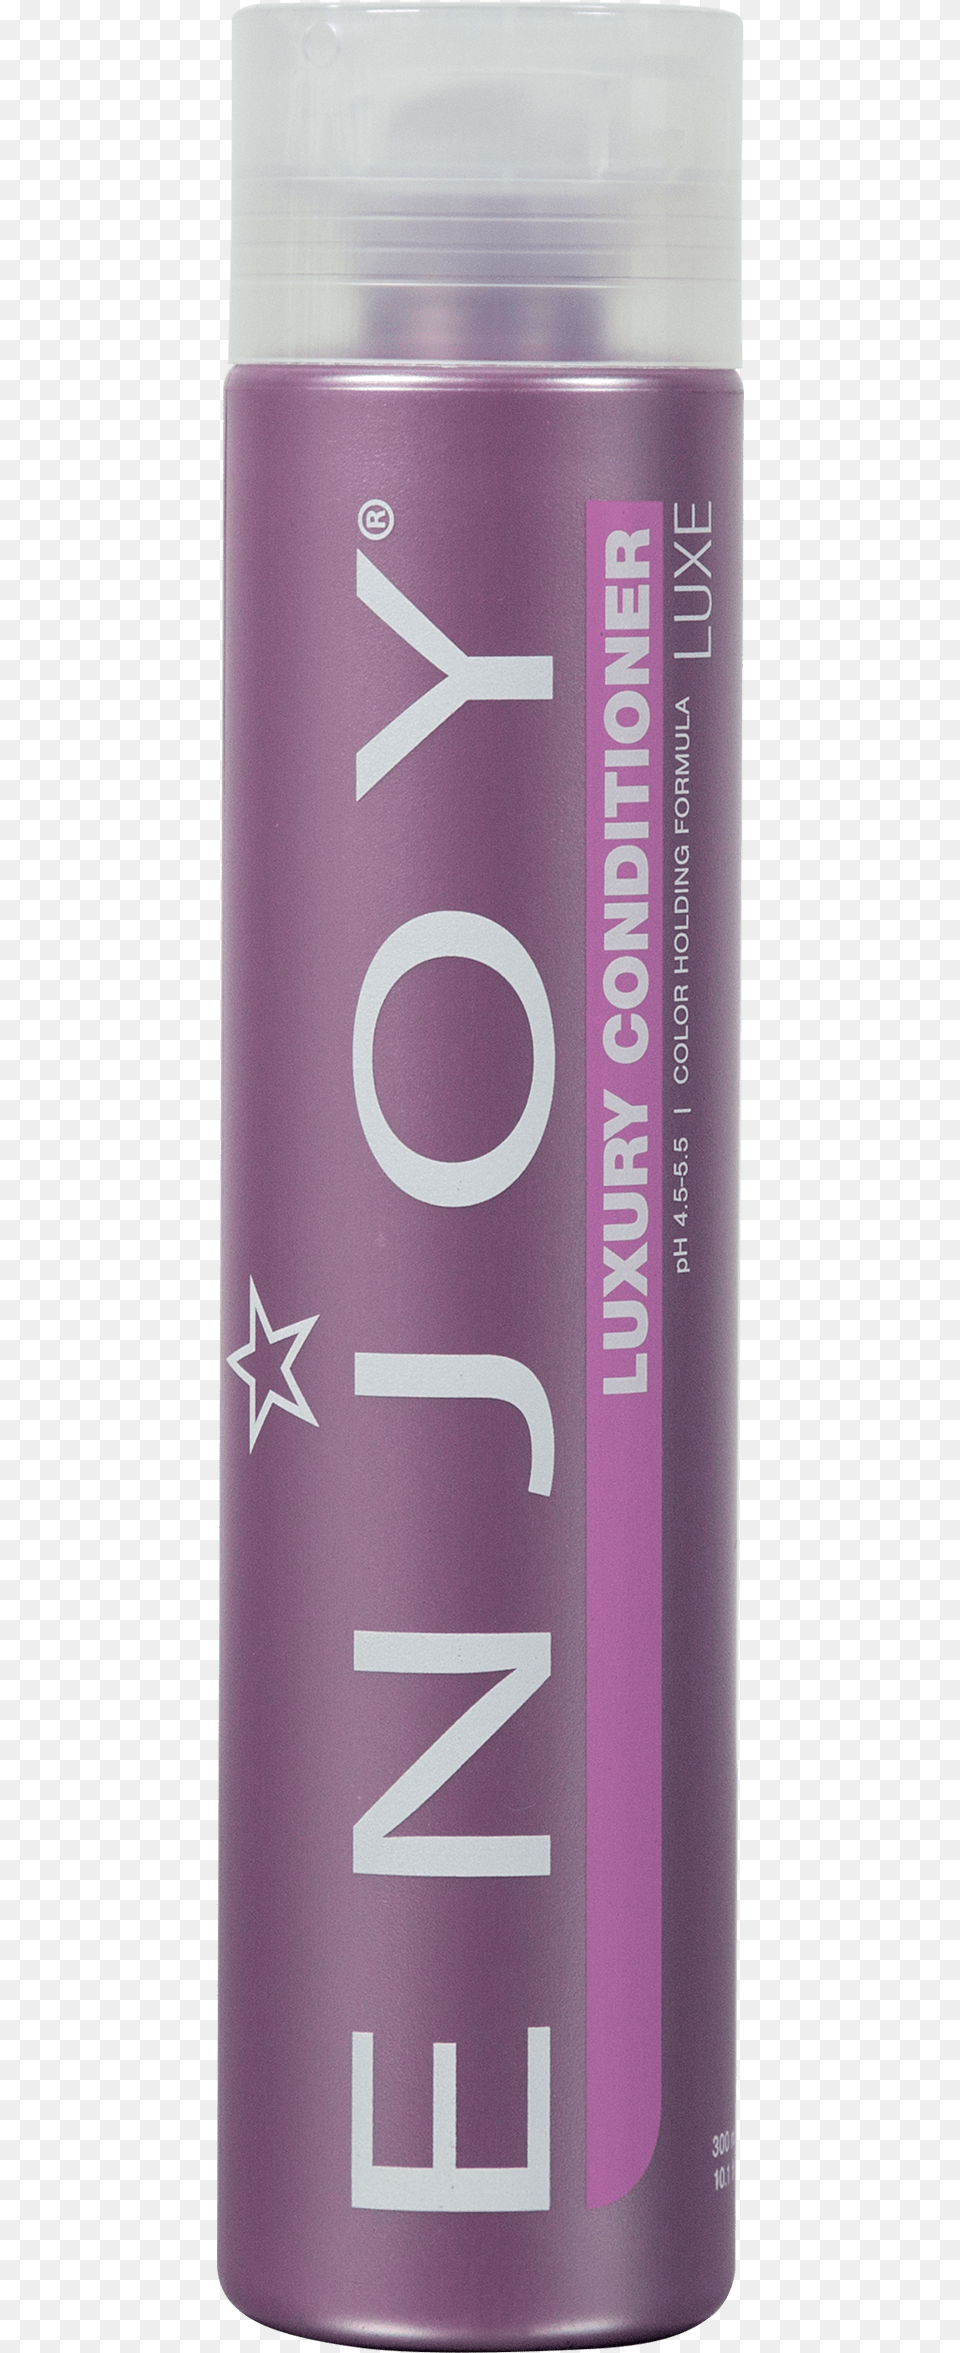 Luxury Conditioner Hair Conditioner, Can, Tin, Bottle, Cosmetics Free Png Download